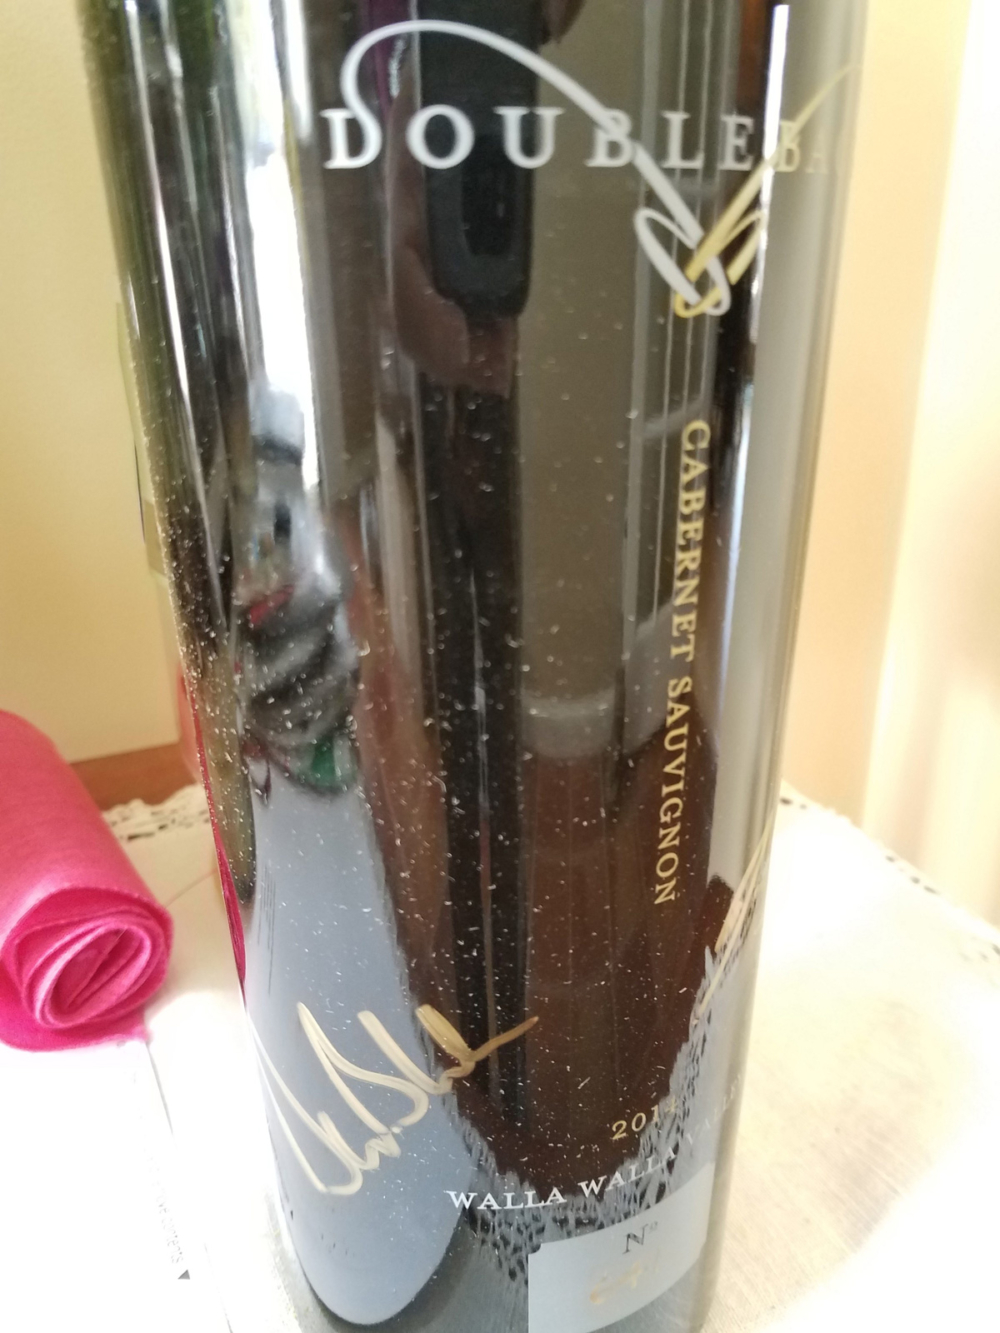 Doubleback Cabernet Sauvignon, signed by the former Patriots QB.